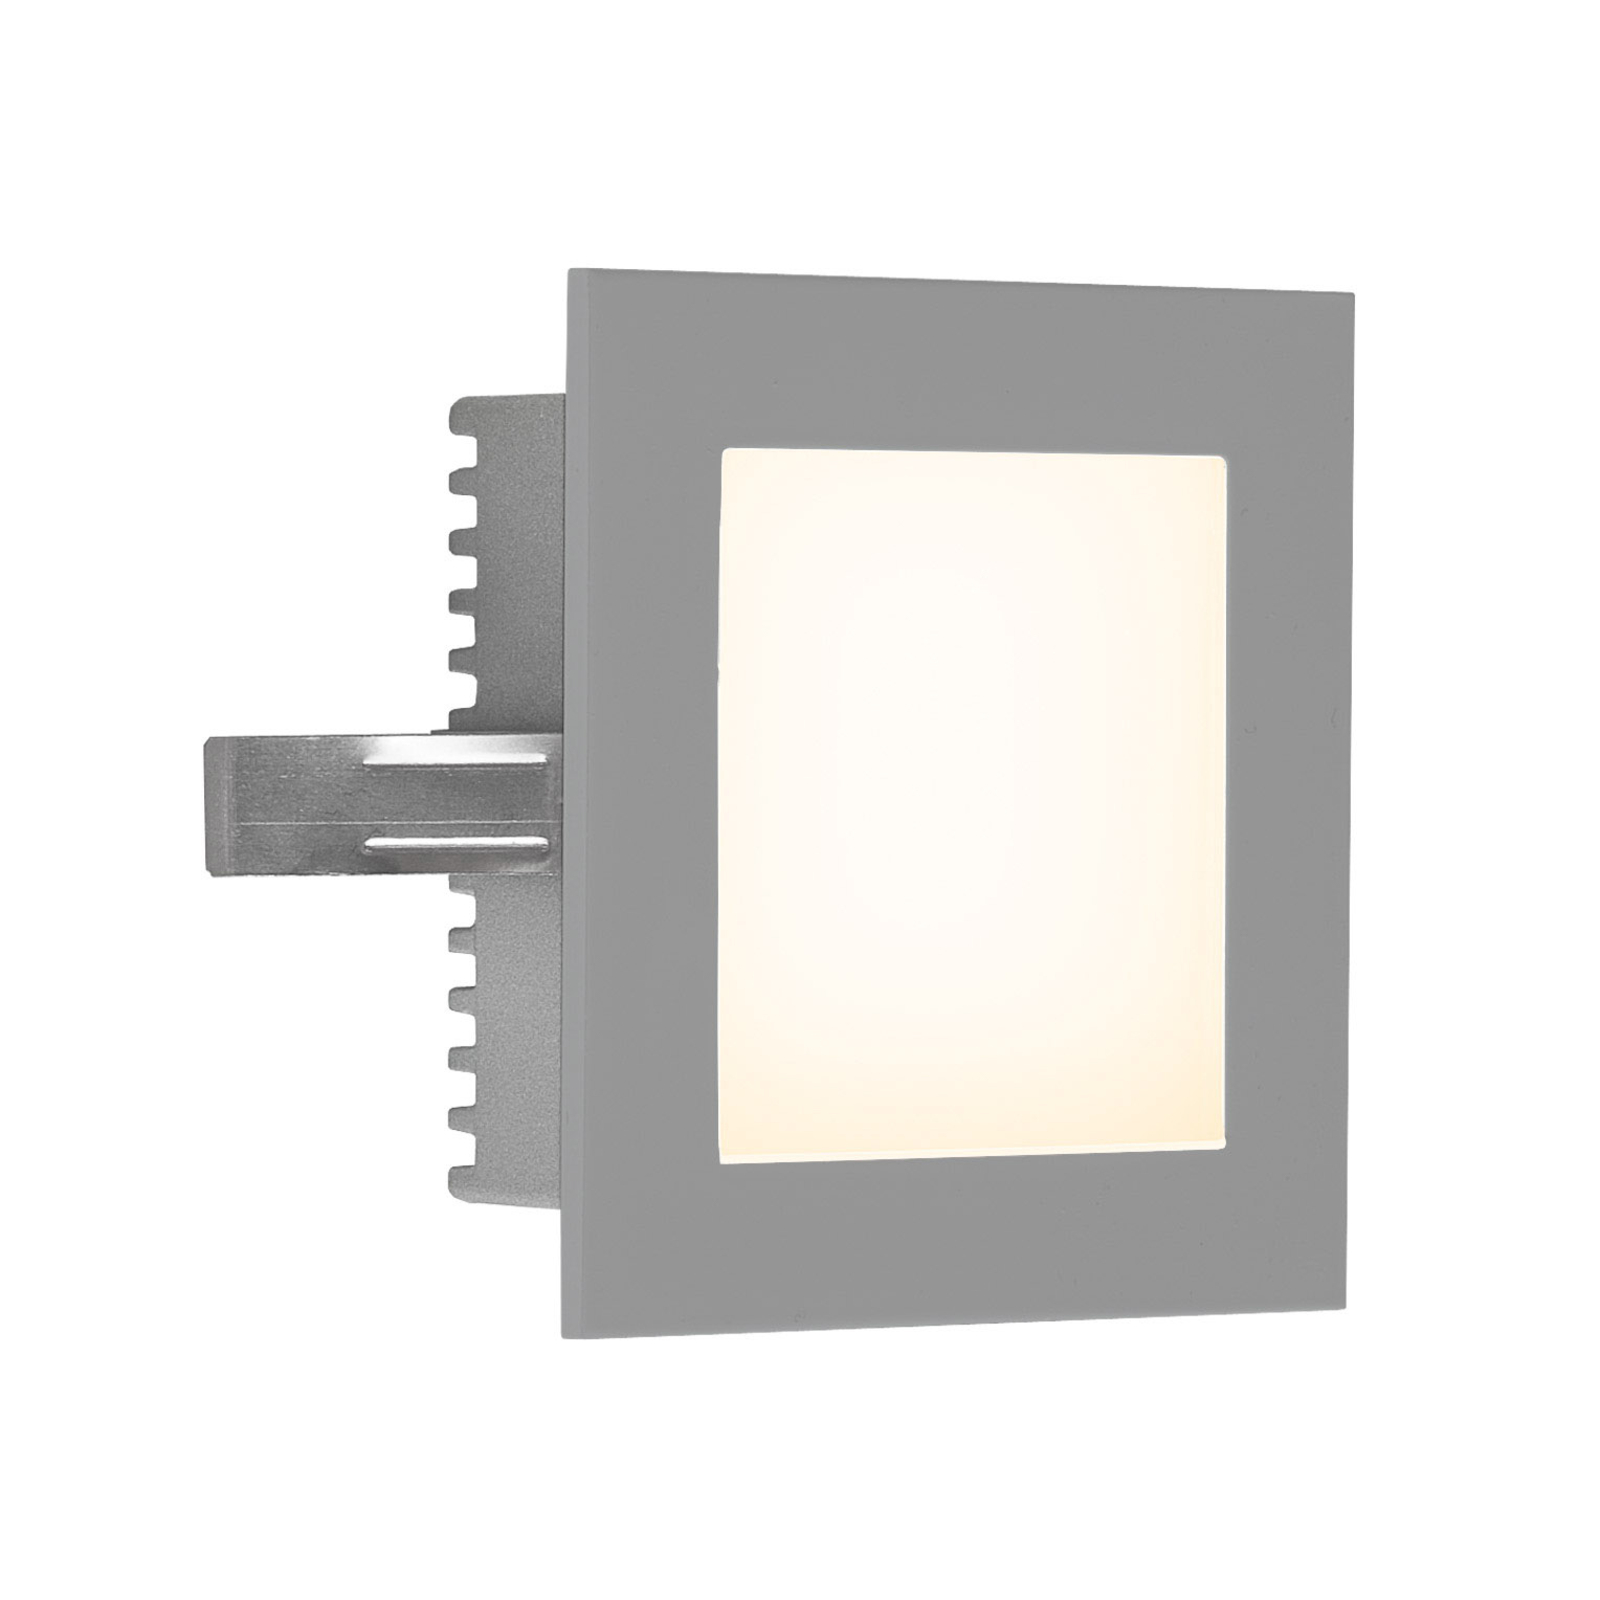 EVN P2180 LED recessed wall light, 3,000 K, silver